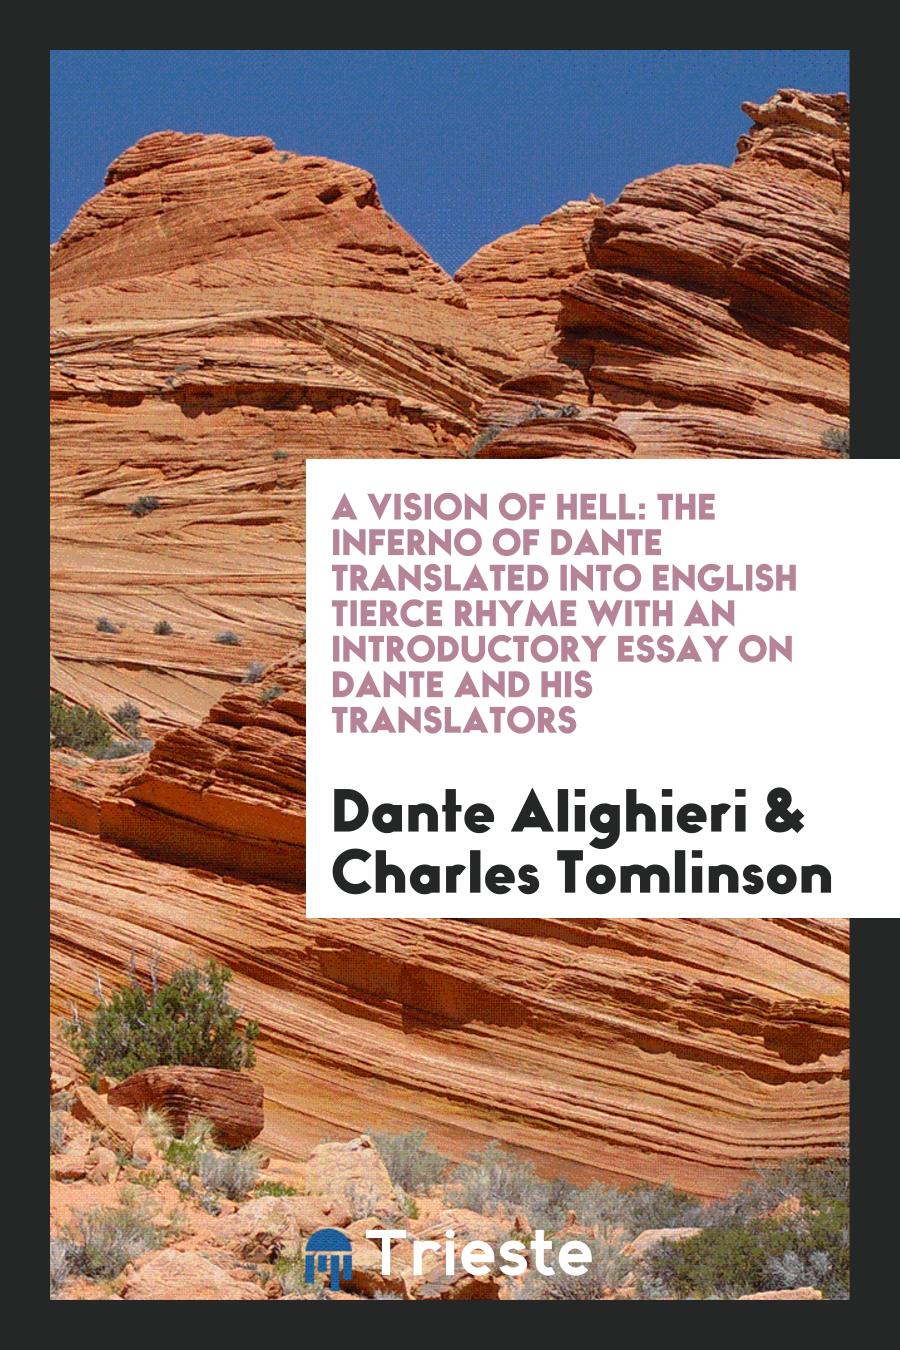 A Vision of Hell: The Inferno of Dante Translated into English Tierce Rhyme with an Introductory Essay on Dante and His Translators